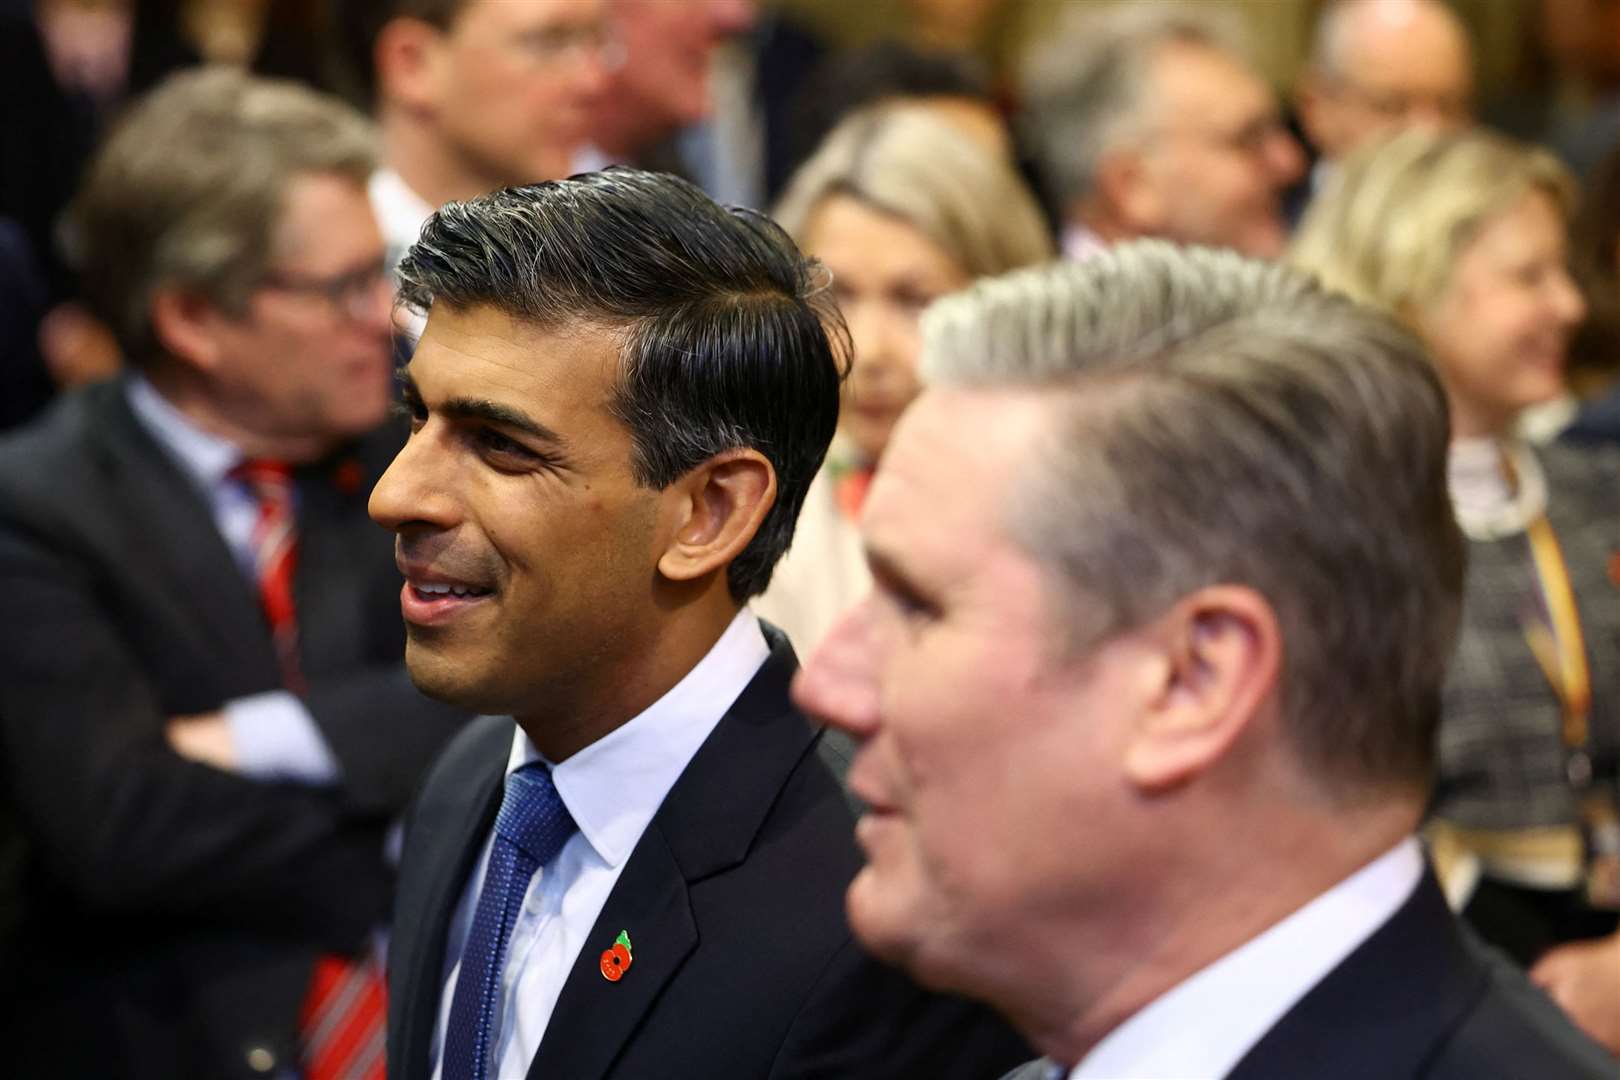 Prime Minister Rishi Sunak and Labour leader Sir Keir Starmer are both attending the UN climate talks in Dubai (Hannah McKay/PA)